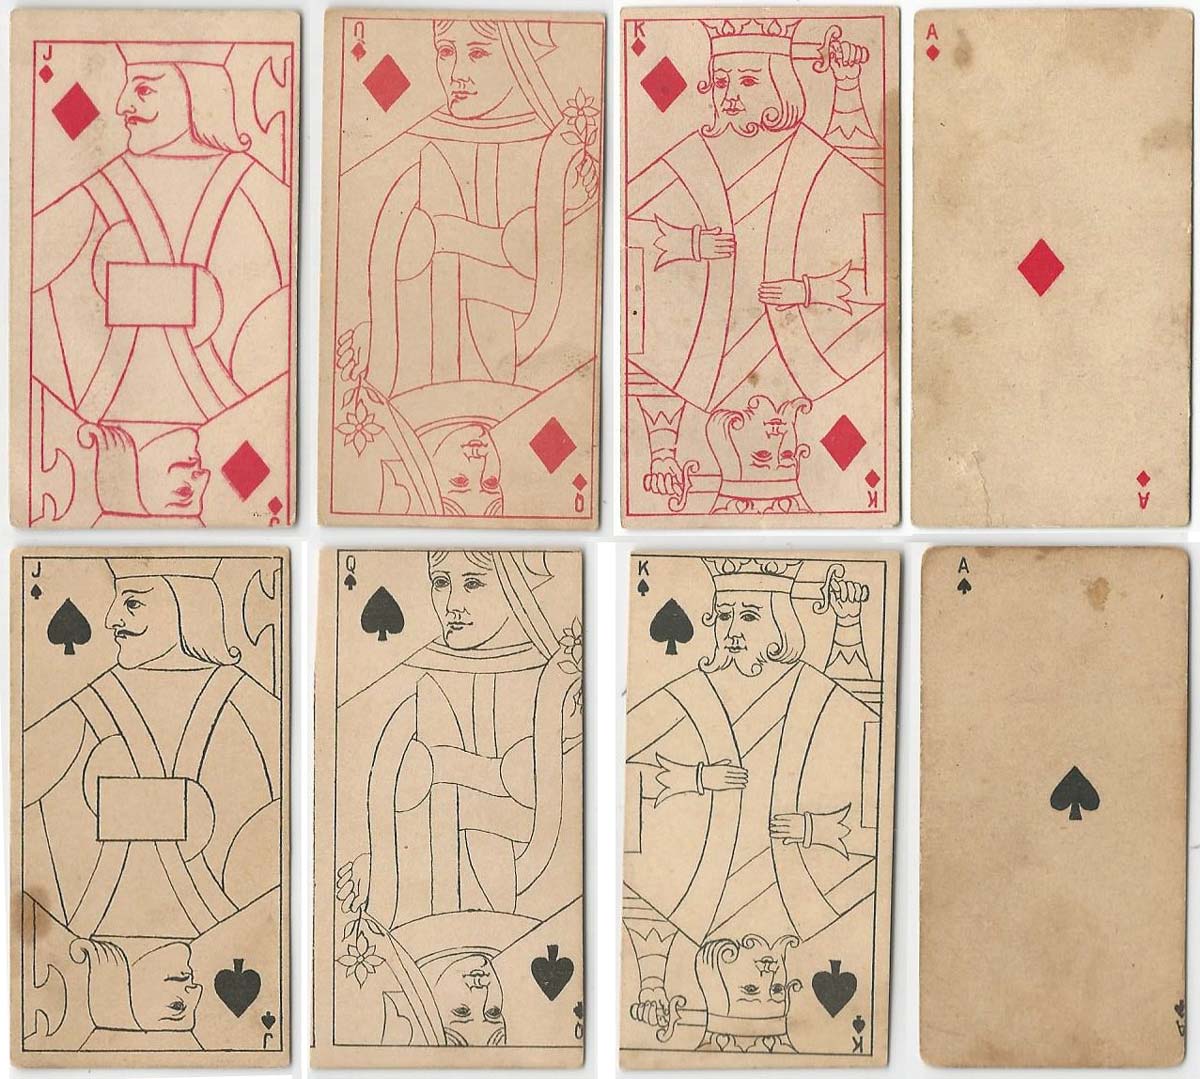 Kinney Transparent playing cards, c.1890